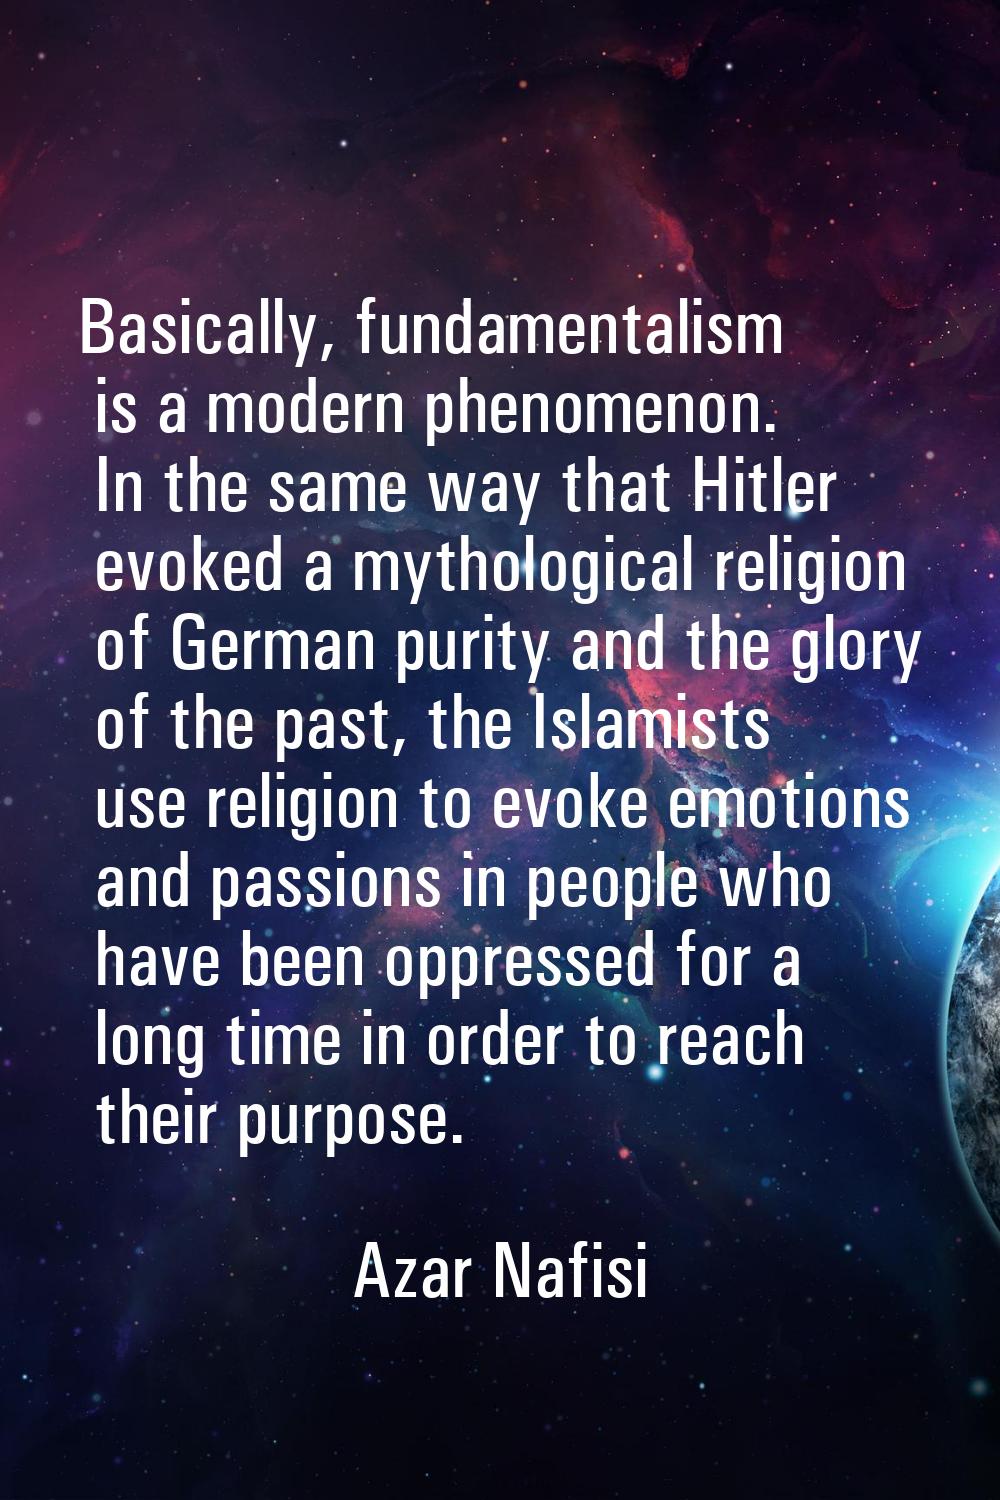 Basically, fundamentalism is a modern phenomenon. In the same way that Hitler evoked a mythological